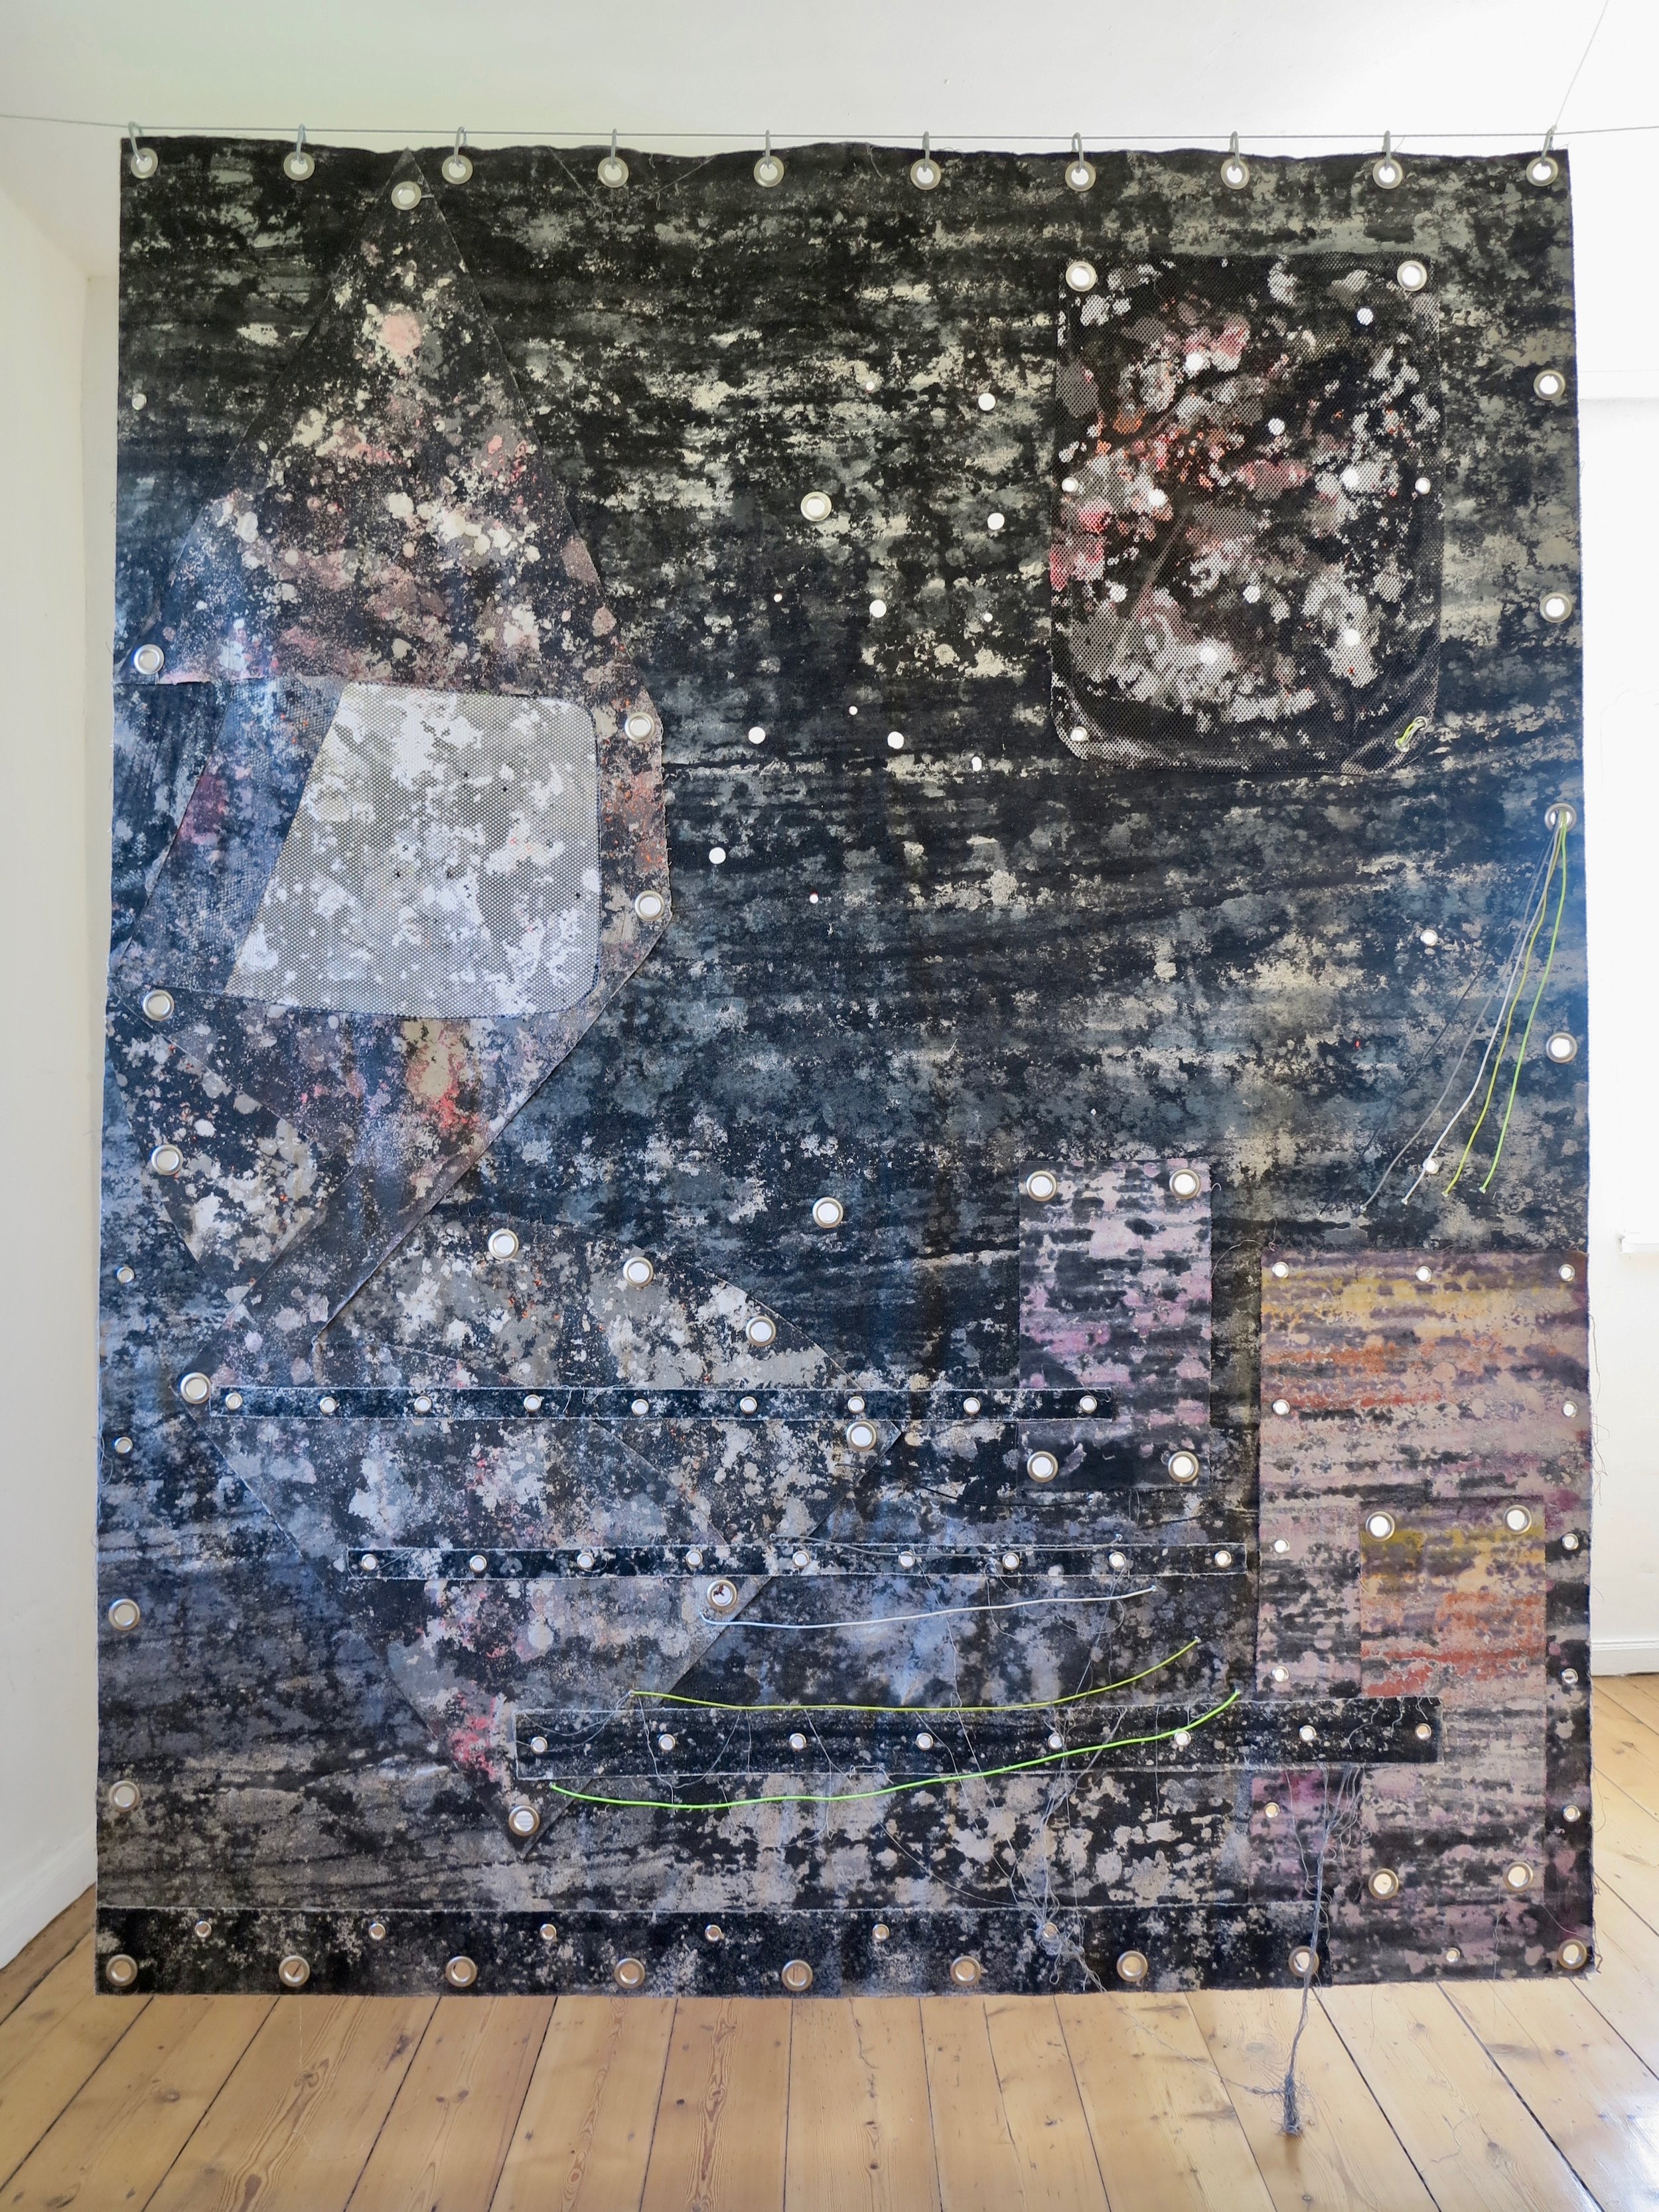   Loco Motif (A Side).   Alkyd resin, acrylic, sand, brass, rubber, polyester, polyethylene, canvas and steel.  Double sided / 266 x 213 cm.   Heterotopic Tourism  @ Lab Kalkhorst, Germany 2019. 